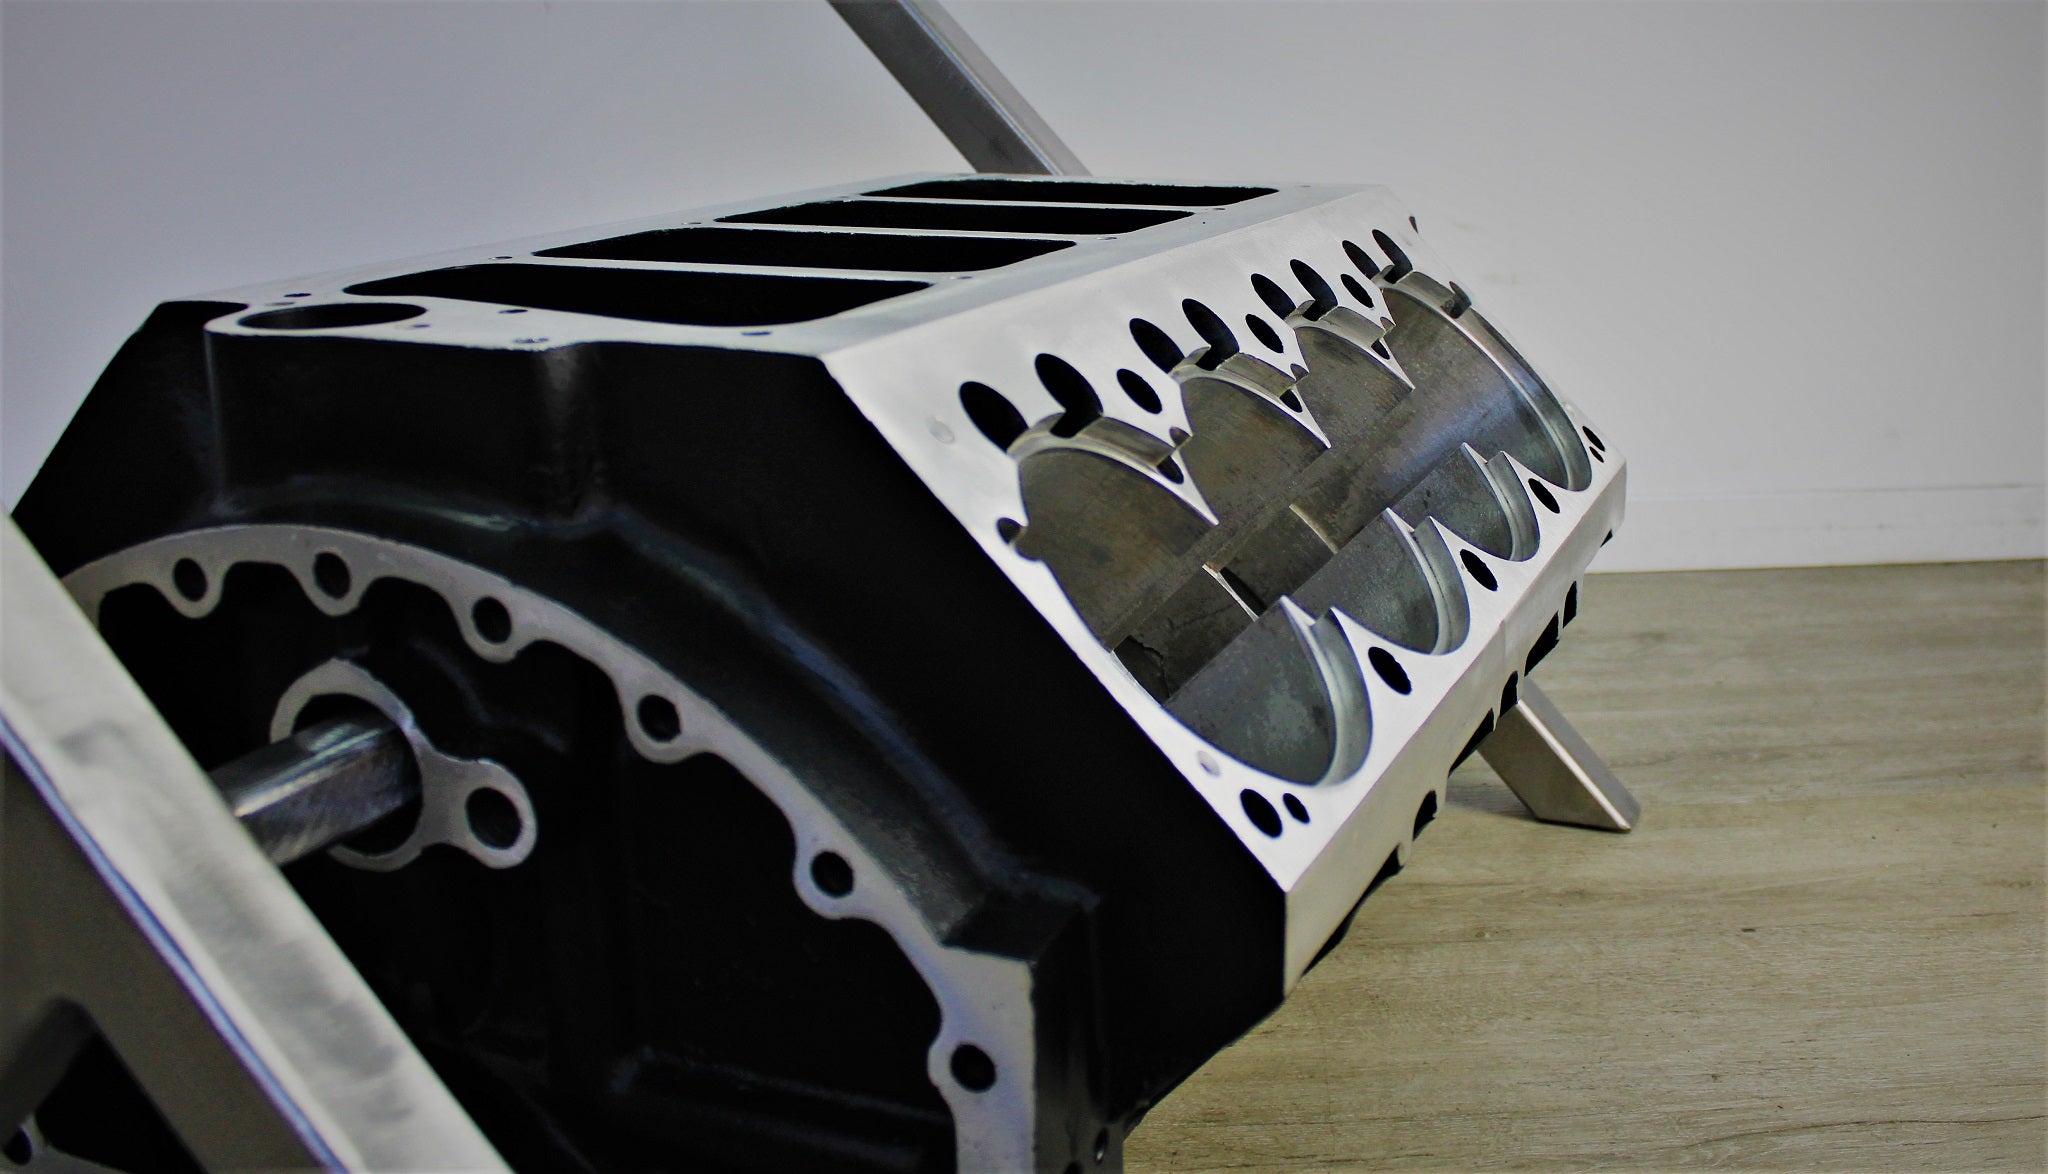 Close-up view of a Top Fuel aluminum engine block coffee table finished in black and silver.